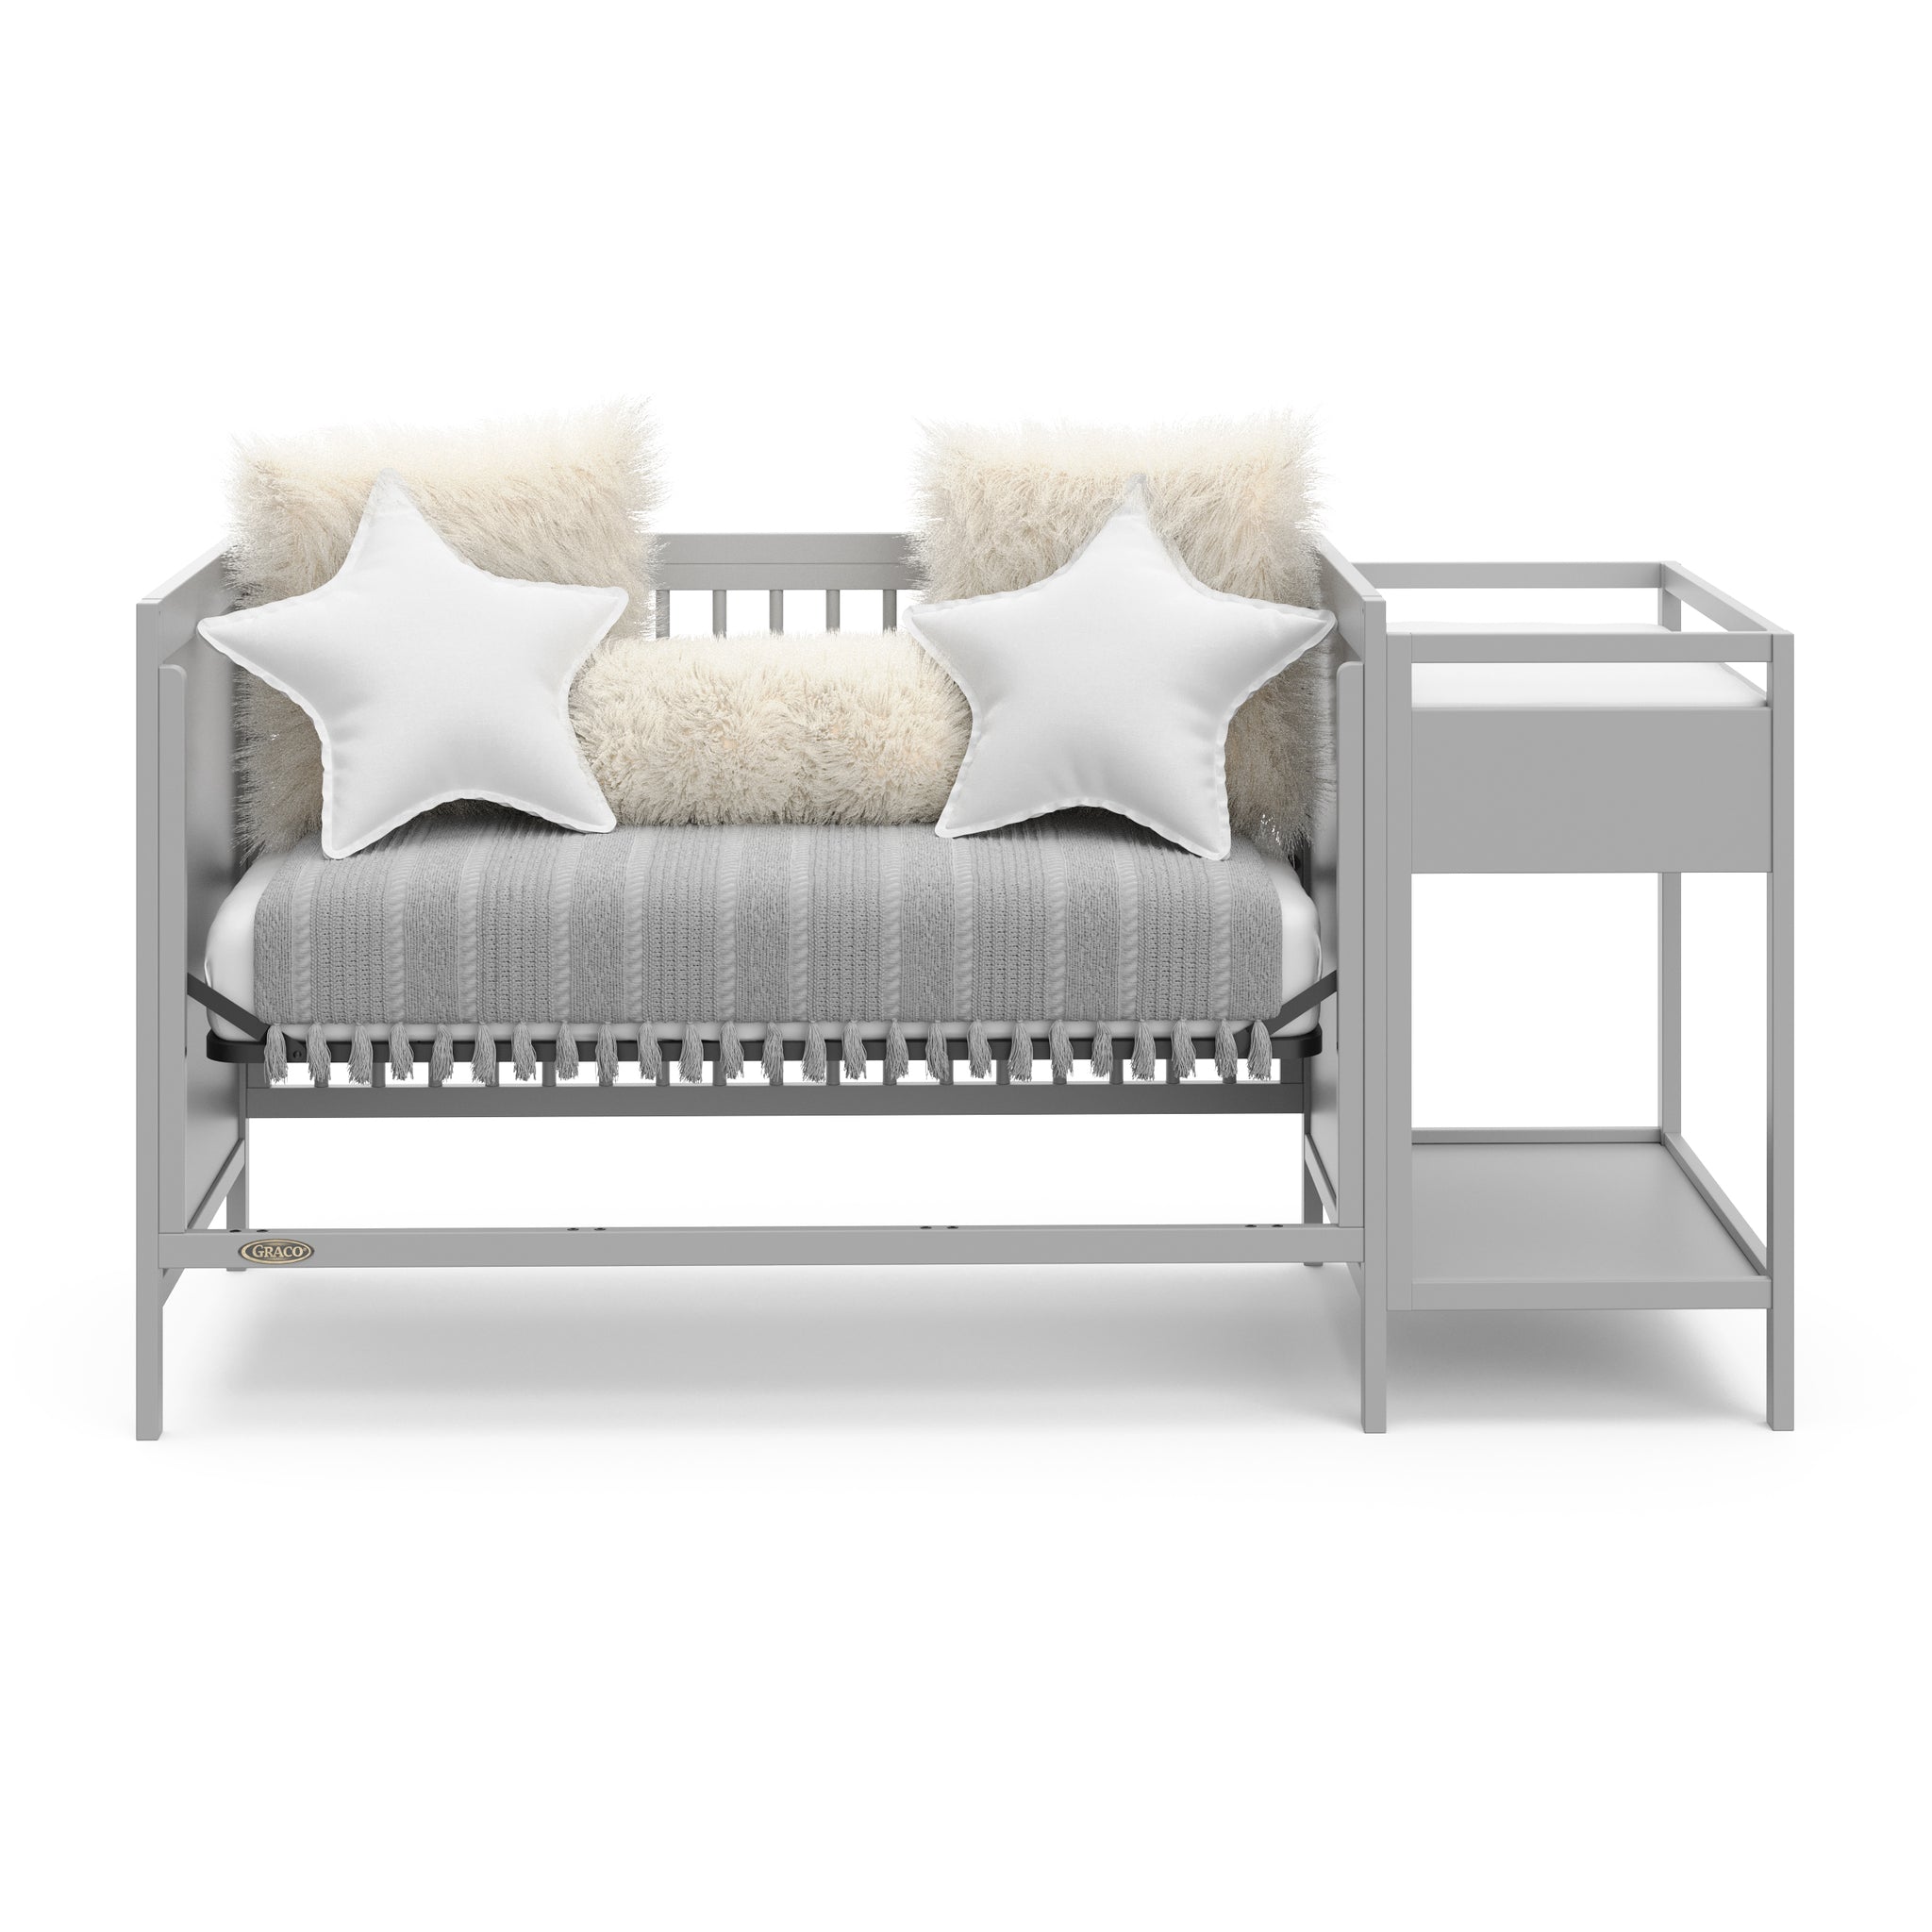 Pebble gray crib and changer in daybed conversion